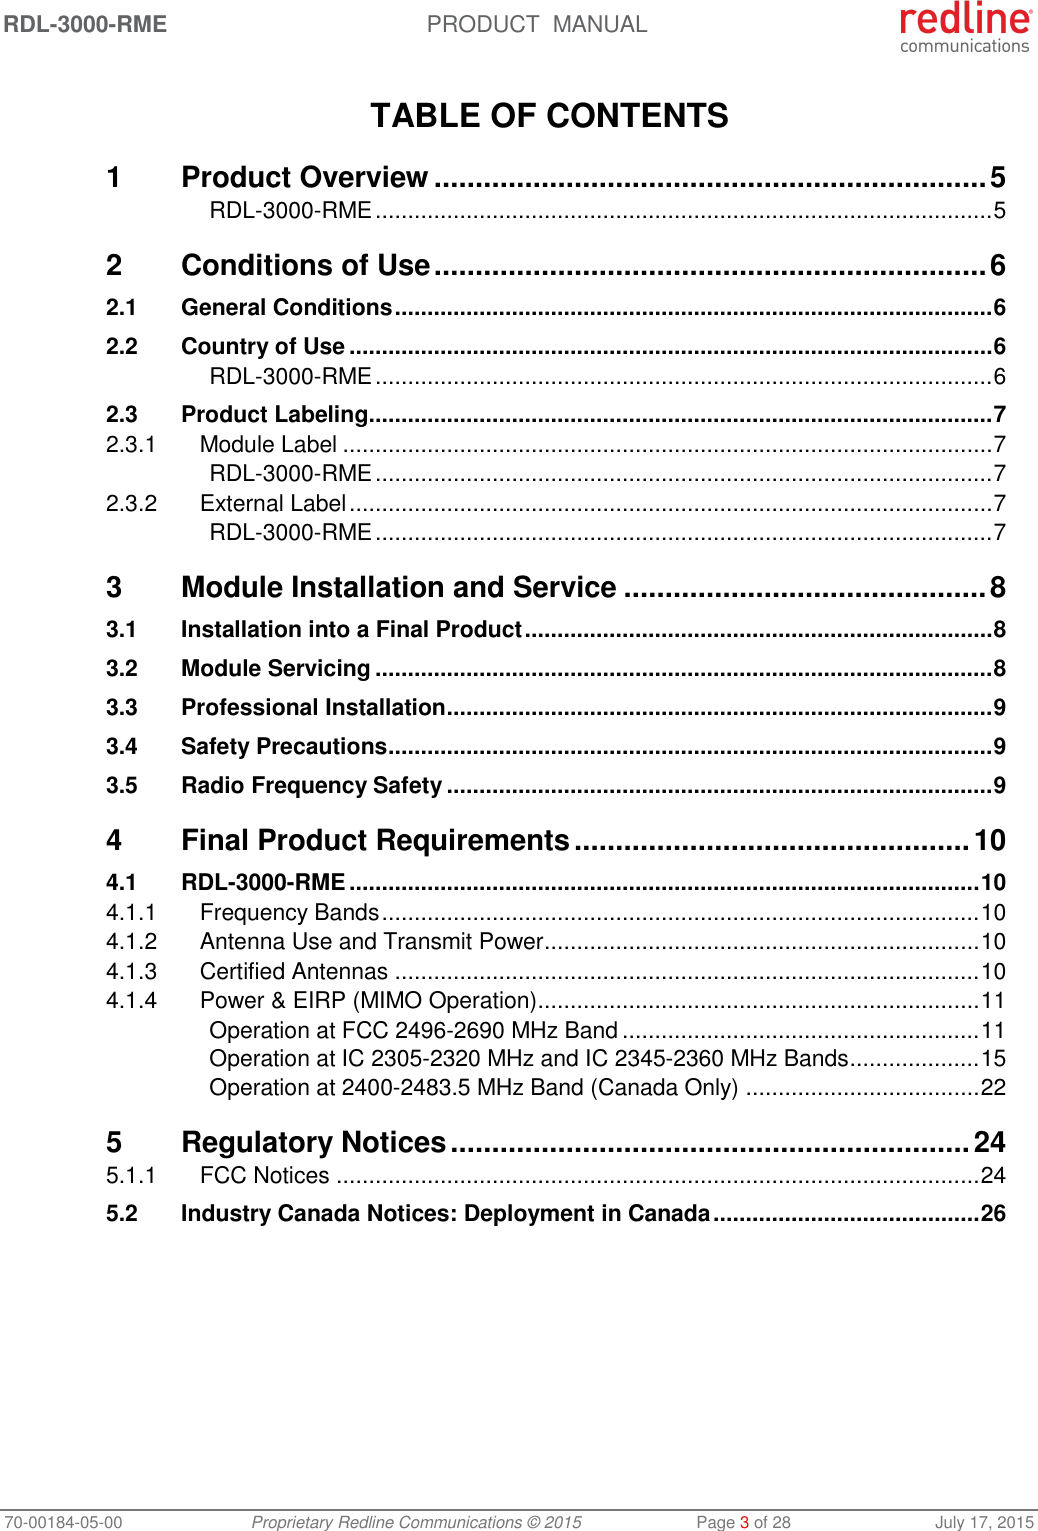 RDL-3000-RME  PRODUCT  MANUAL 70-00184-05-00 Proprietary Redline Communications © 2015  Page 3 of 28  July 17, 2015  TABLE OF CONTENTS 1 Product Overview ................................................................... 5 RDL-3000-RME ............................................................................................... 5 2 Conditions of Use ................................................................... 6 2.1 General Conditions ............................................................................................ 6 2.2 Country of Use ................................................................................................... 6 RDL-3000-RME ............................................................................................... 6 2.3 Product Labeling ................................................................................................ 7 2.3.1 Module Label .................................................................................................... 7 RDL-3000-RME ............................................................................................... 7 2.3.2 External Label ................................................................................................... 7 RDL-3000-RME ............................................................................................... 7 3 Module Installation and Service ............................................ 8 3.1 Installation into a Final Product ........................................................................ 8 3.2 Module Servicing ............................................................................................... 8 3.3 Professional Installation .................................................................................... 9 3.4 Safety Precautions ............................................................................................. 9 3.5 Radio Frequency Safety .................................................................................... 9 4 Final Product Requirements ................................................ 10 4.1 RDL-3000-RME ................................................................................................. 10 4.1.1 Frequency Bands ............................................................................................ 10 4.1.2 Antenna Use and Transmit Power ................................................................... 10 4.1.3 Certified Antennas .......................................................................................... 10 4.1.4 Power &amp; EIRP (MIMO Operation) .................................................................... 11 Operation at FCC 2496-2690 MHz Band ....................................................... 11 Operation at IC 2305-2320 MHz and IC 2345-2360 MHz Bands .................... 15 Operation at 2400-2483.5 MHz Band (Canada Only) .................................... 22 5 Regulatory Notices ............................................................... 24 5.1.1 FCC Notices ................................................................................................... 24 5.2 Industry Canada Notices: Deployment in Canada ......................................... 26   